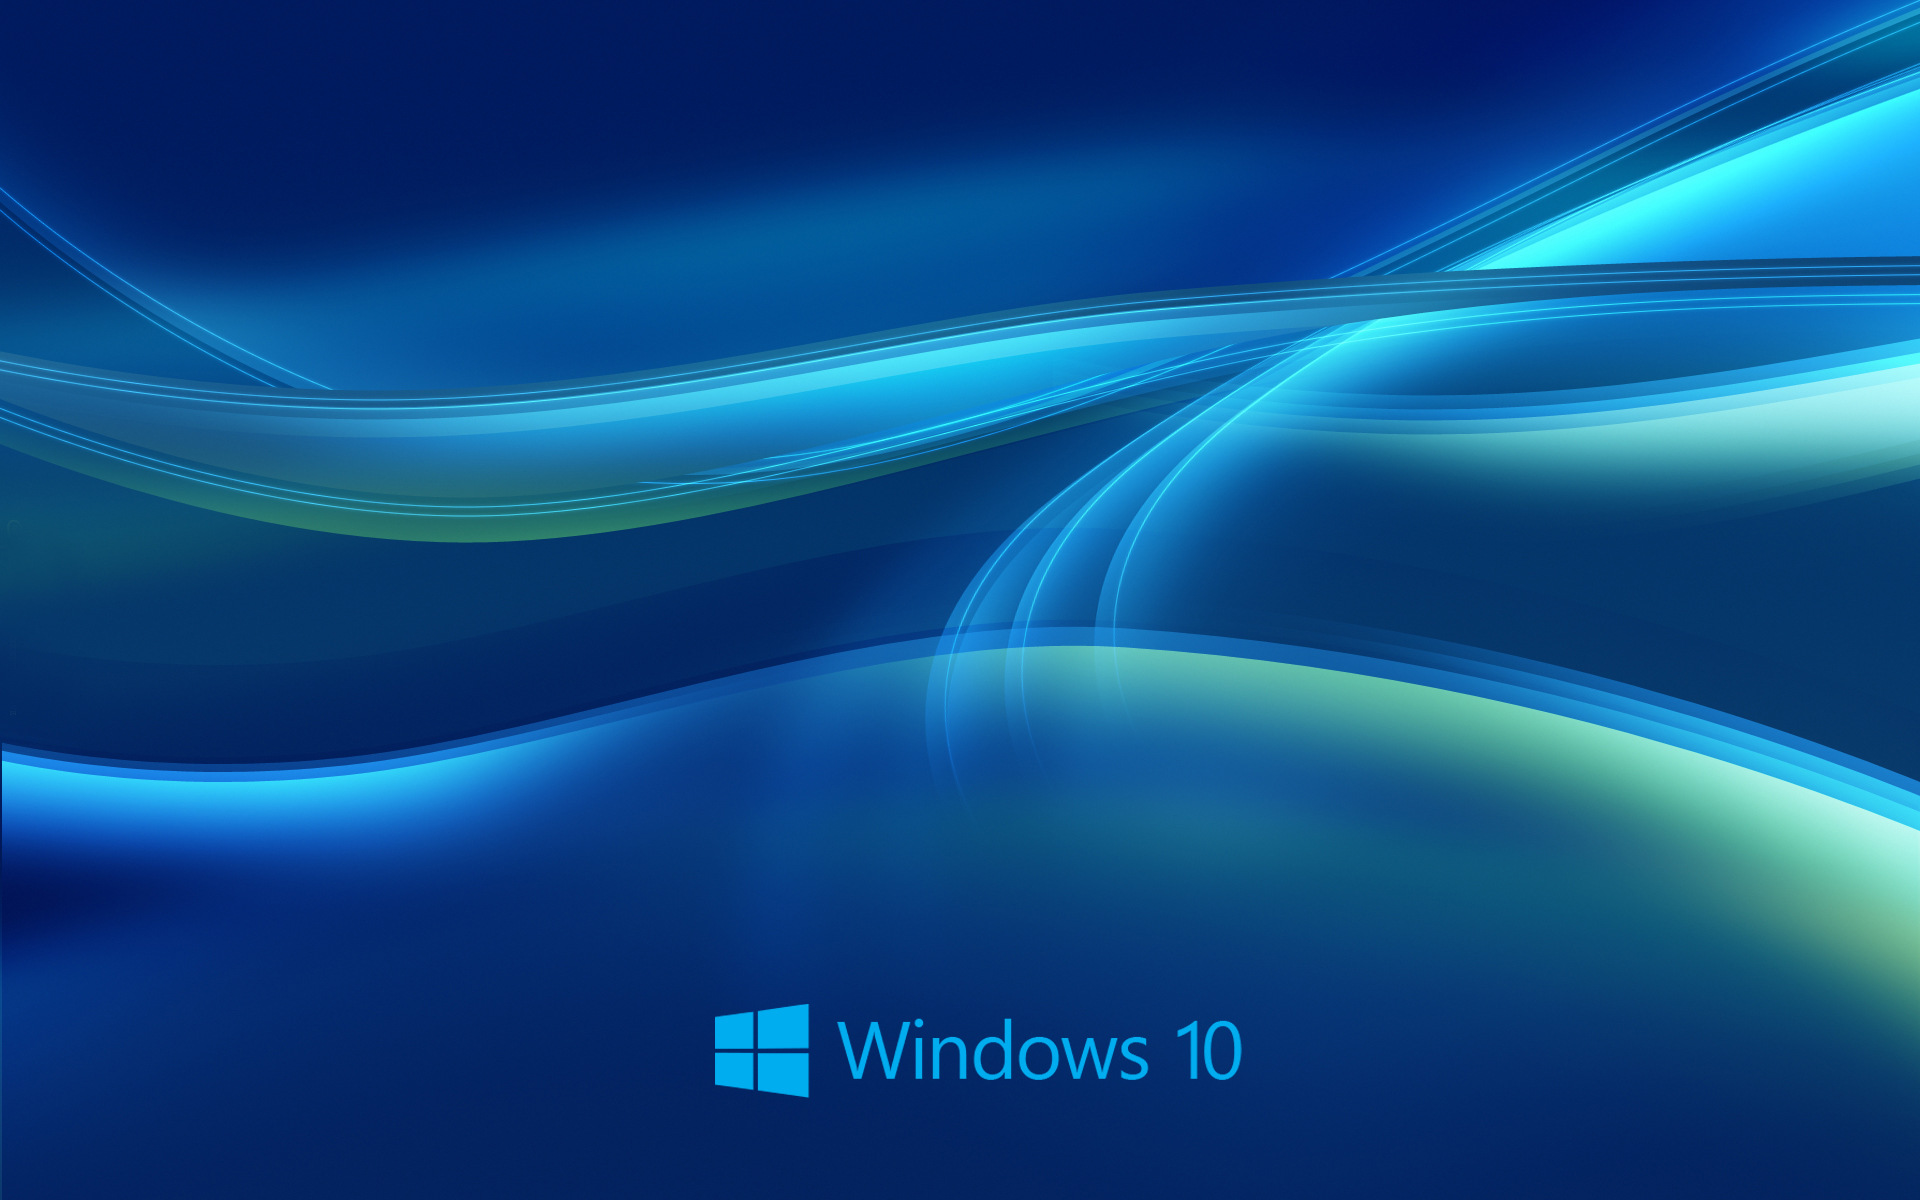 Free download Windows 10 Logo Wallpaper and Theme Pack All for Windows 10 Free [1920x1200] for